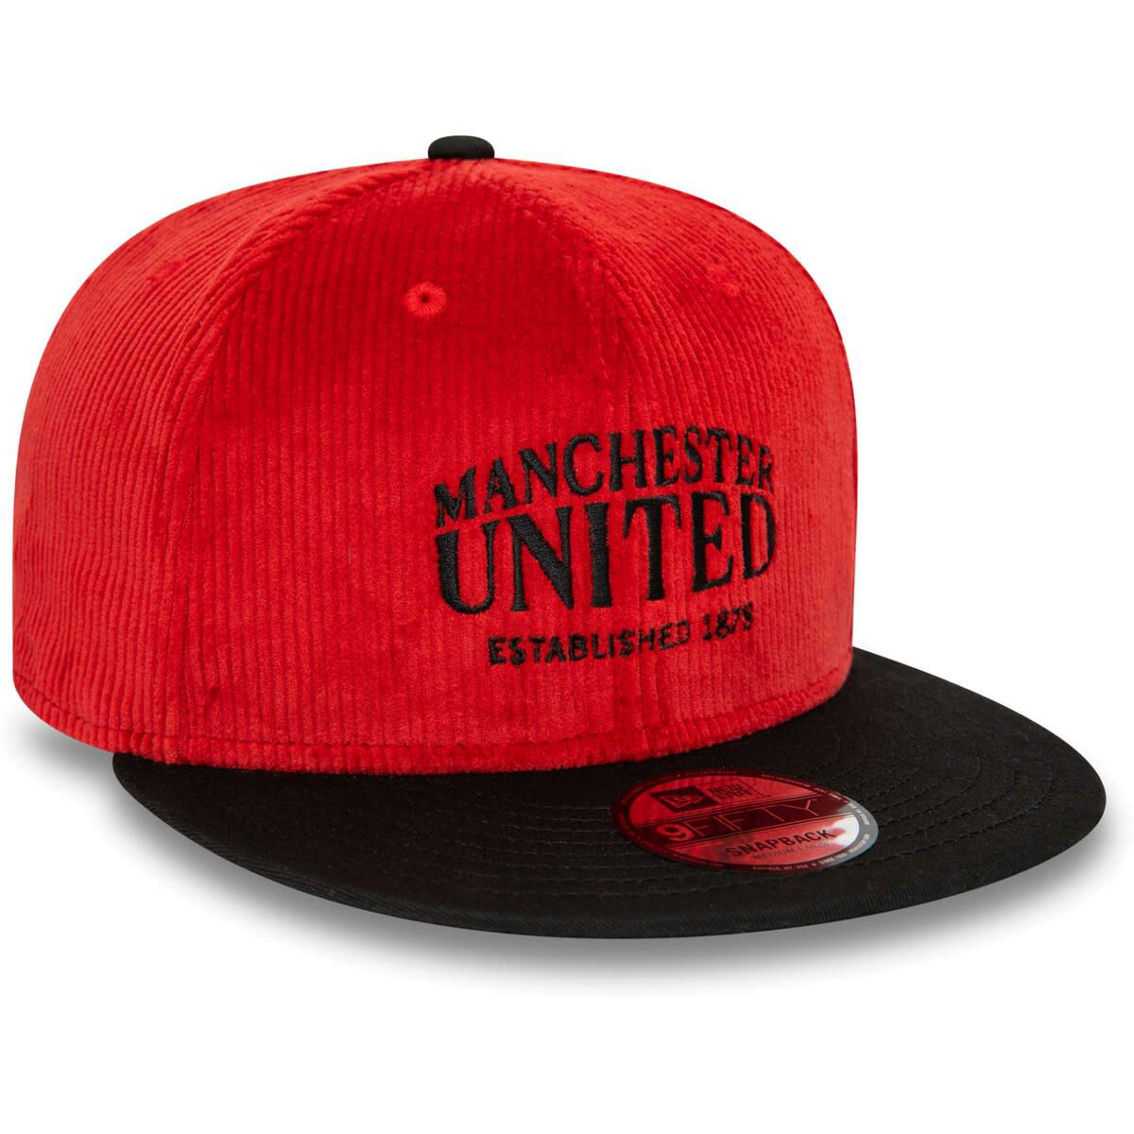 New Era Men's Red Manchester United Corduroy 9FIFTY Snapback Hat - Image 4 of 4